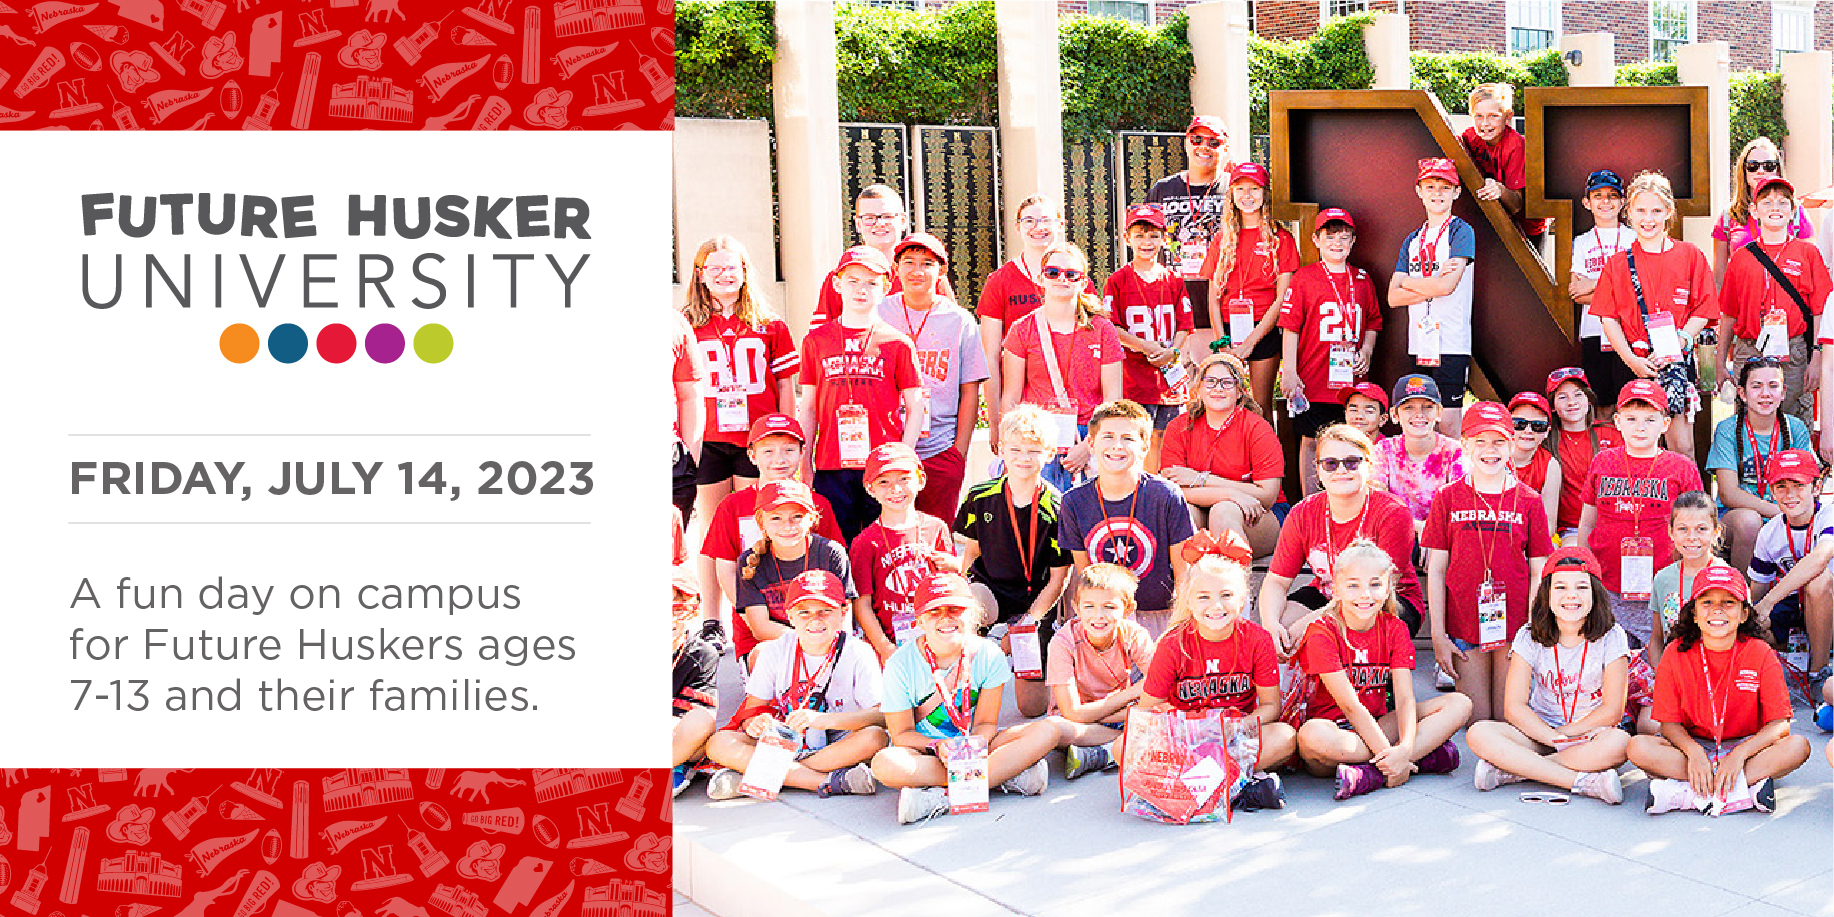 Registration is now open for Future Husker University on July 14. This interactive Husker experience is open to any future Husker ages 7-13 and their families.